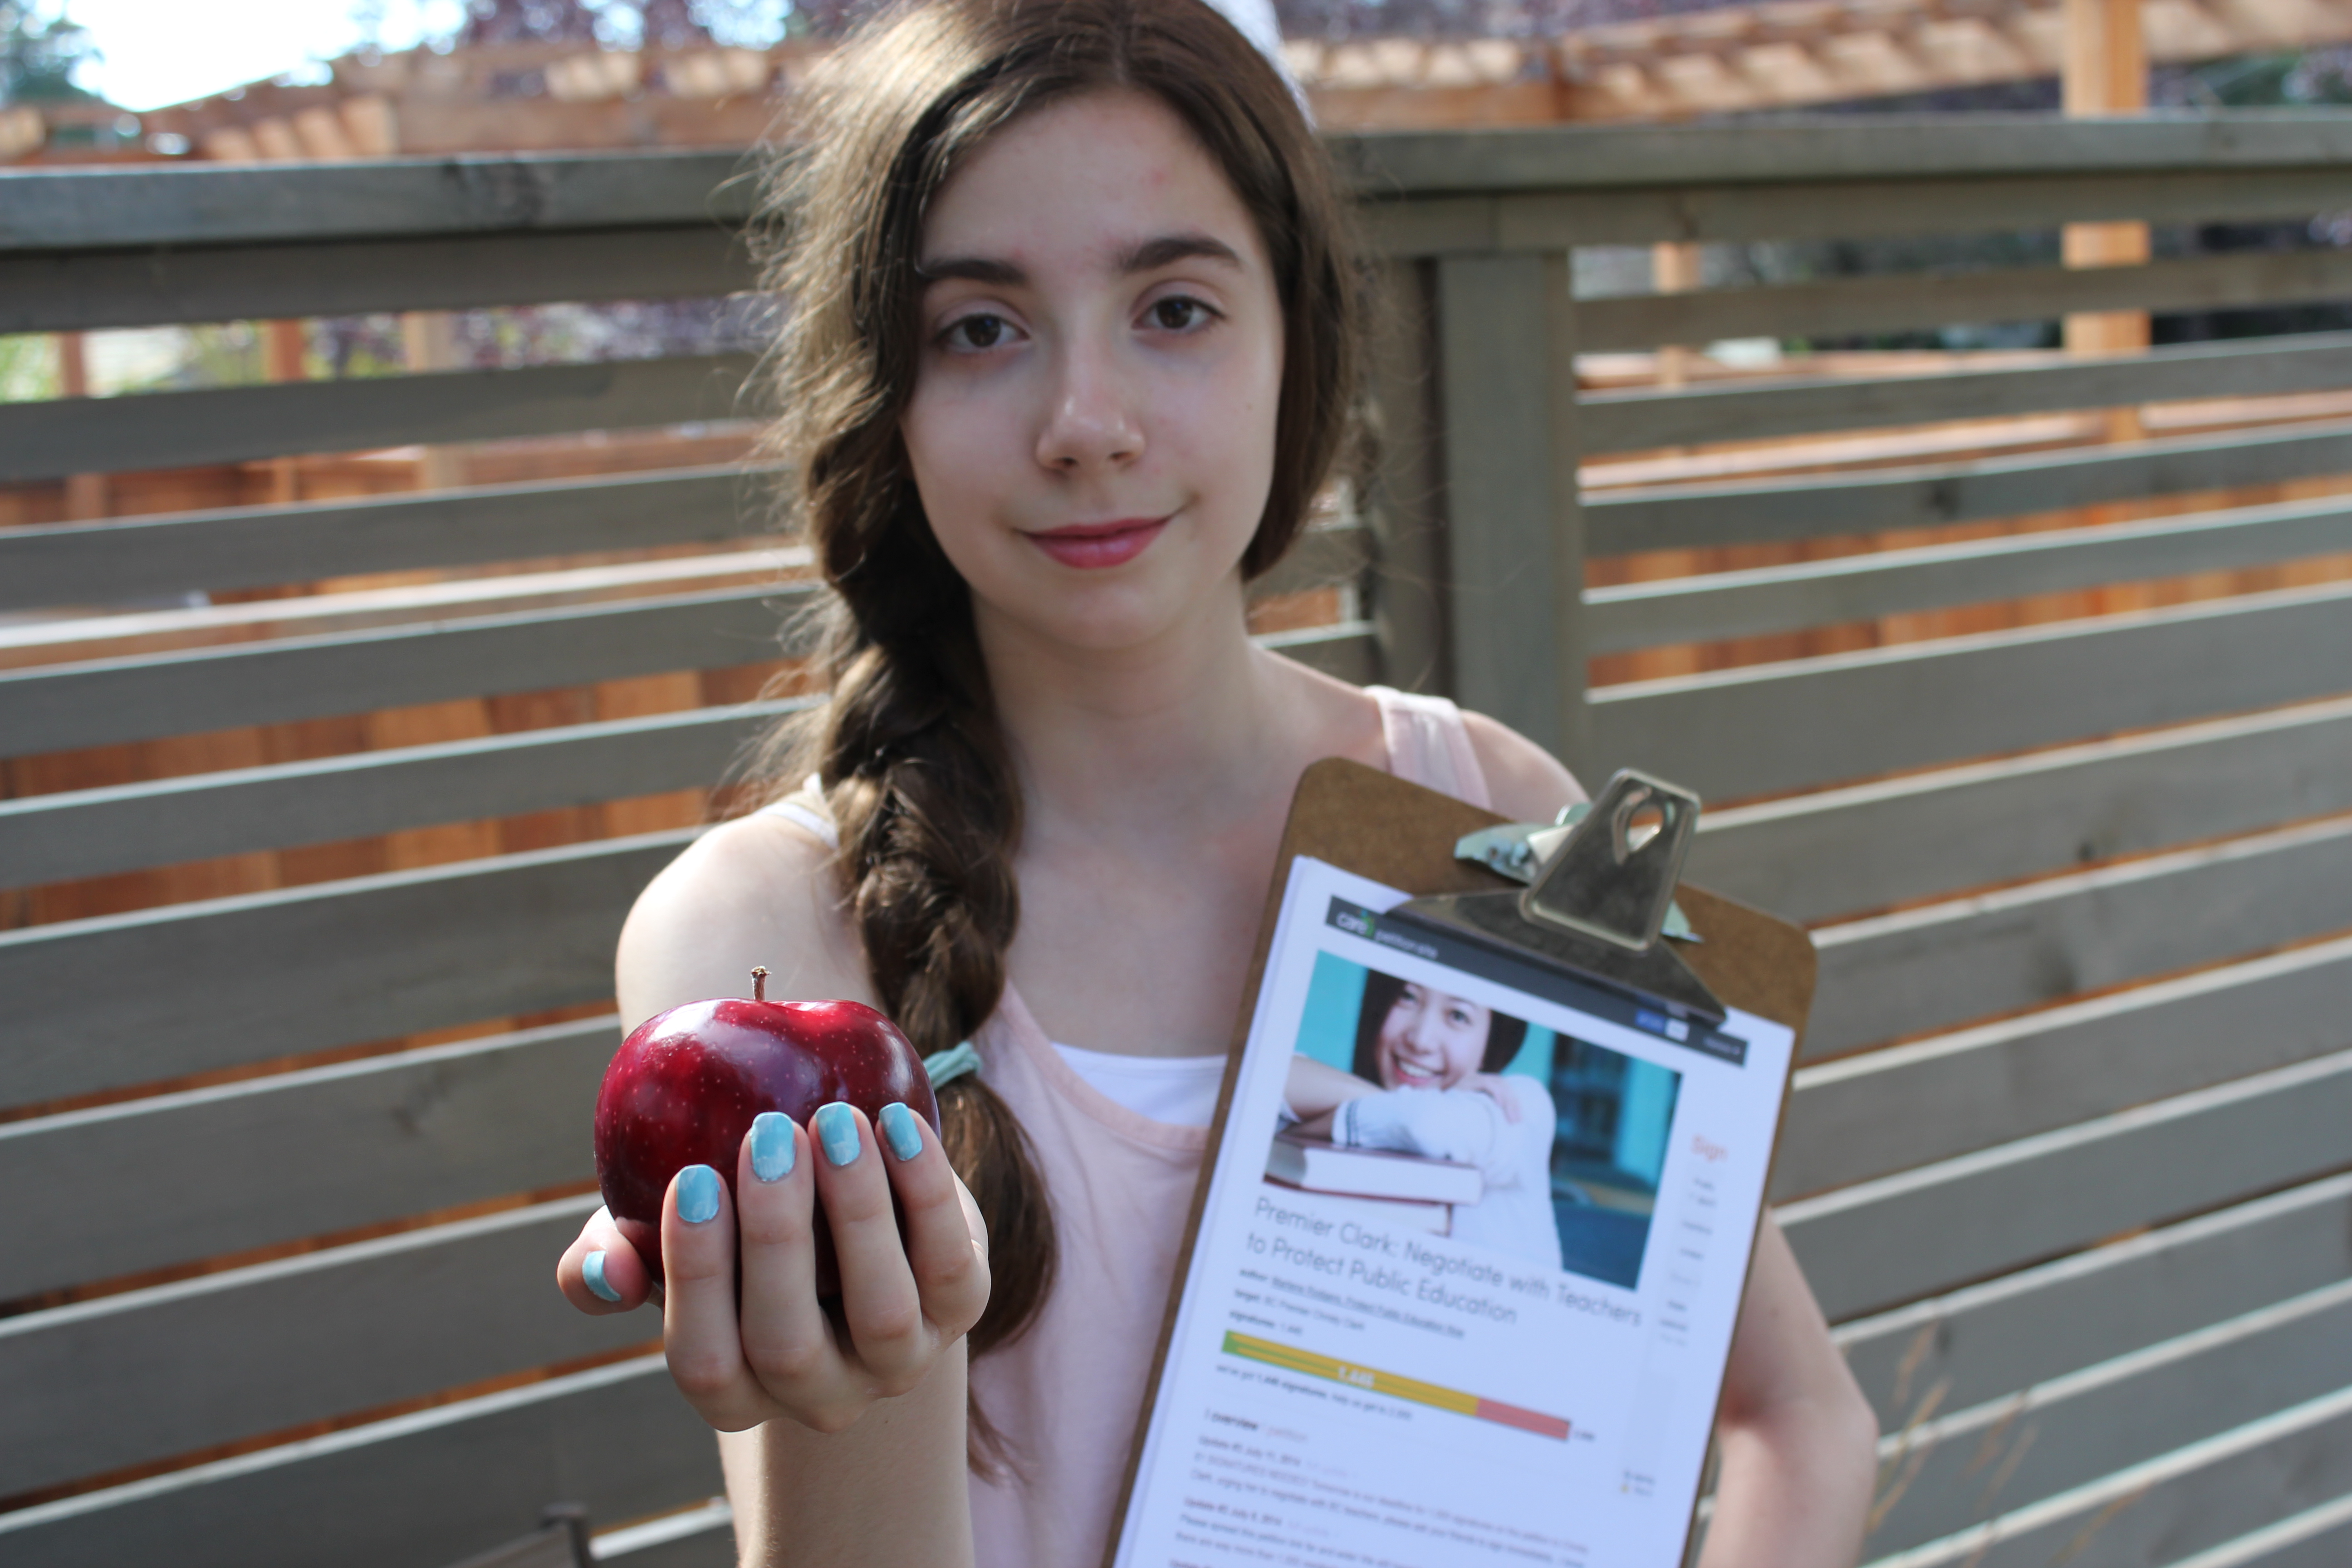 Julia Pante with apple and petition